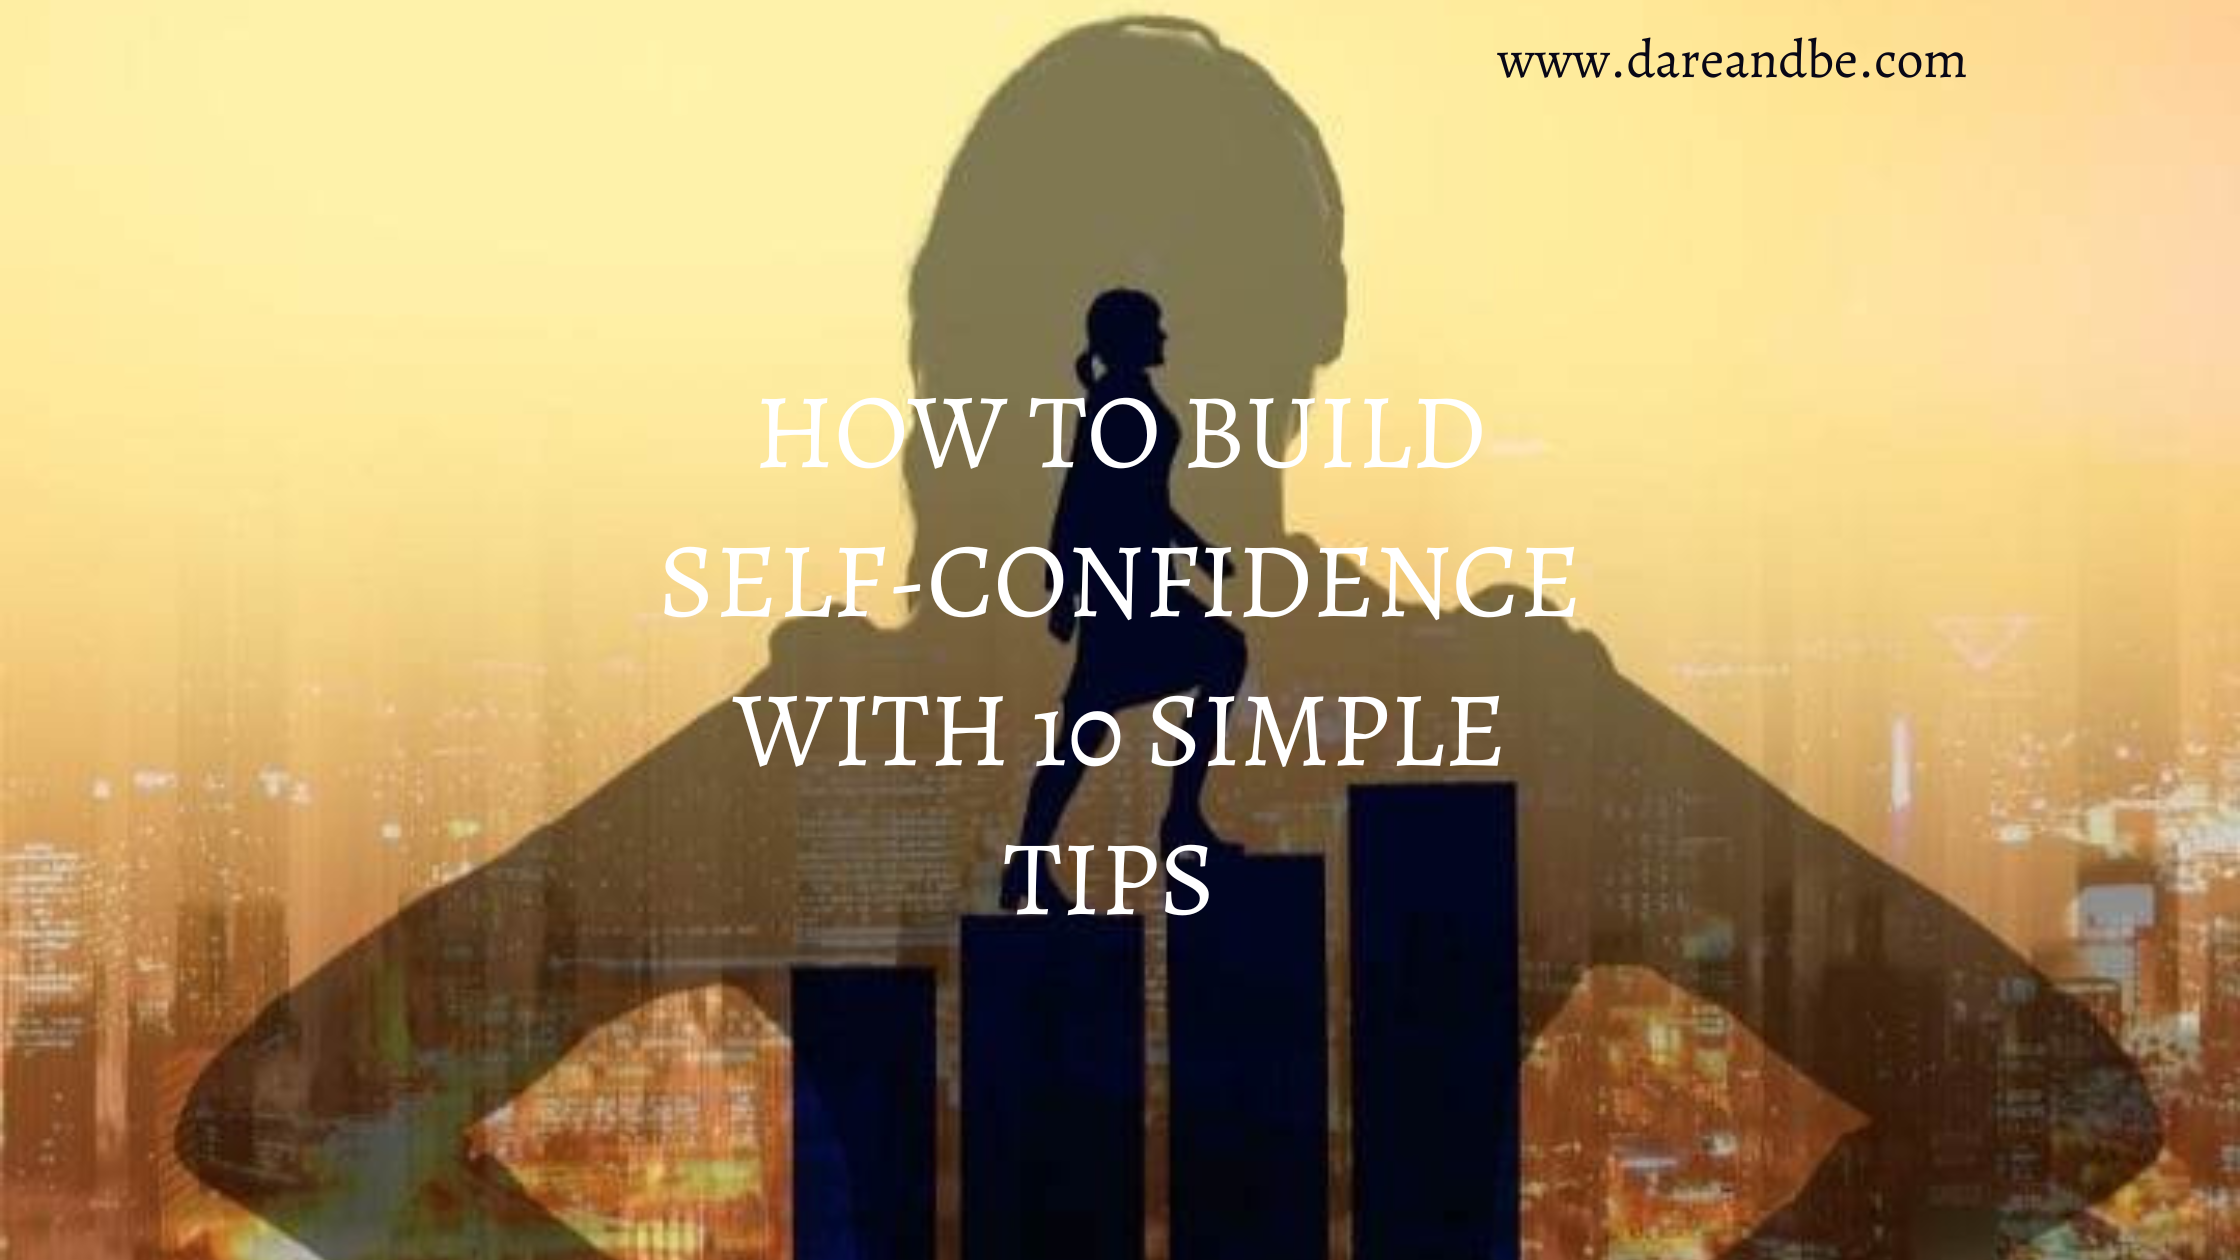 how to build self-confidence with 10 simple tips